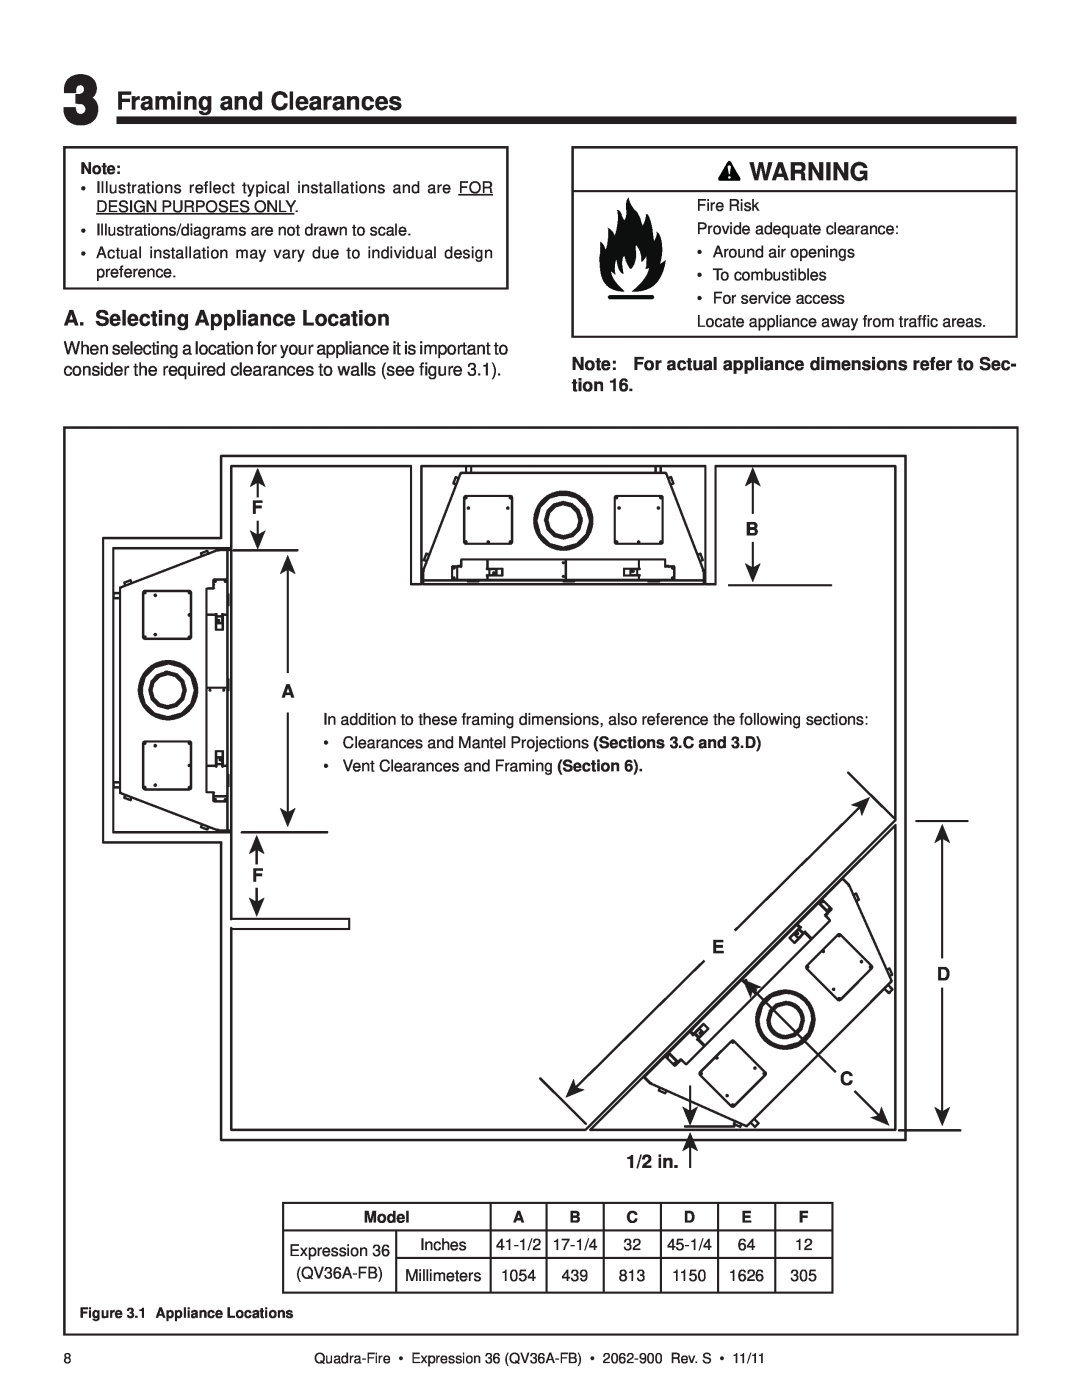 Quadra-Fire QV36A-FB owner manual Framing and Clearances, A.Selecting Appliance Location, F B A, F E D C, 1/2 in, Model 